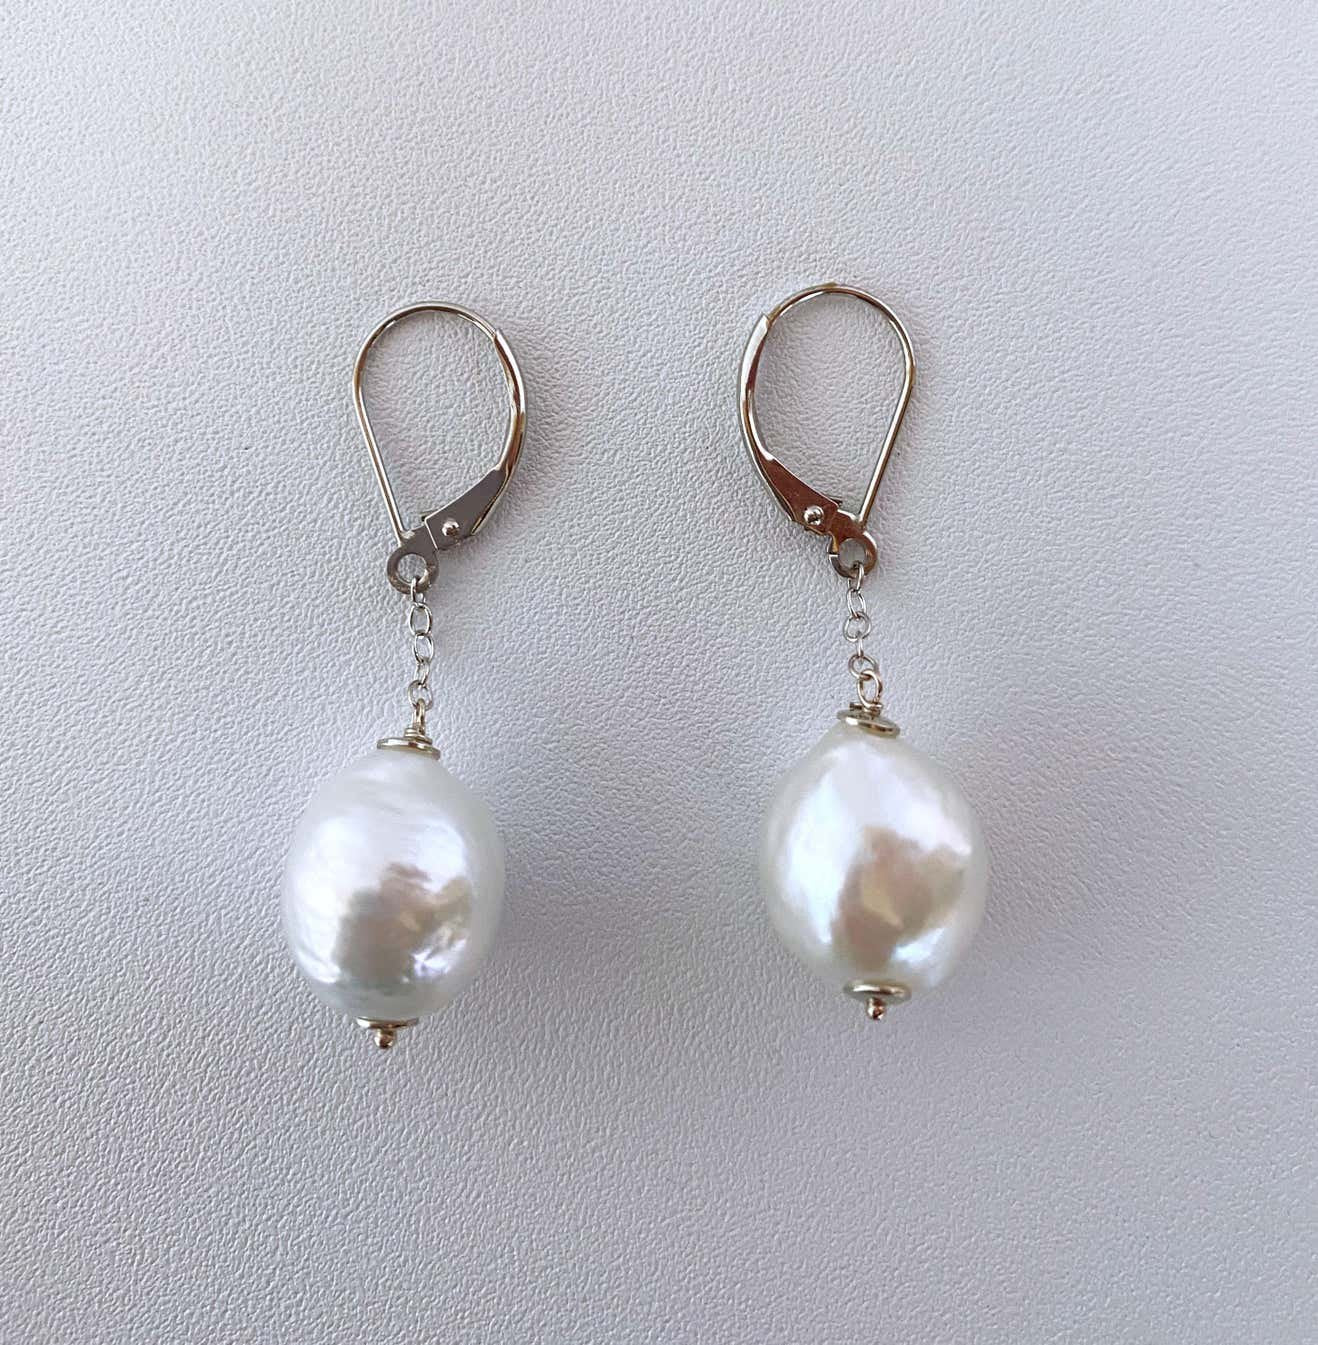 Baroque Pearl Earrings with 14k White Gold Lever Back Hooks